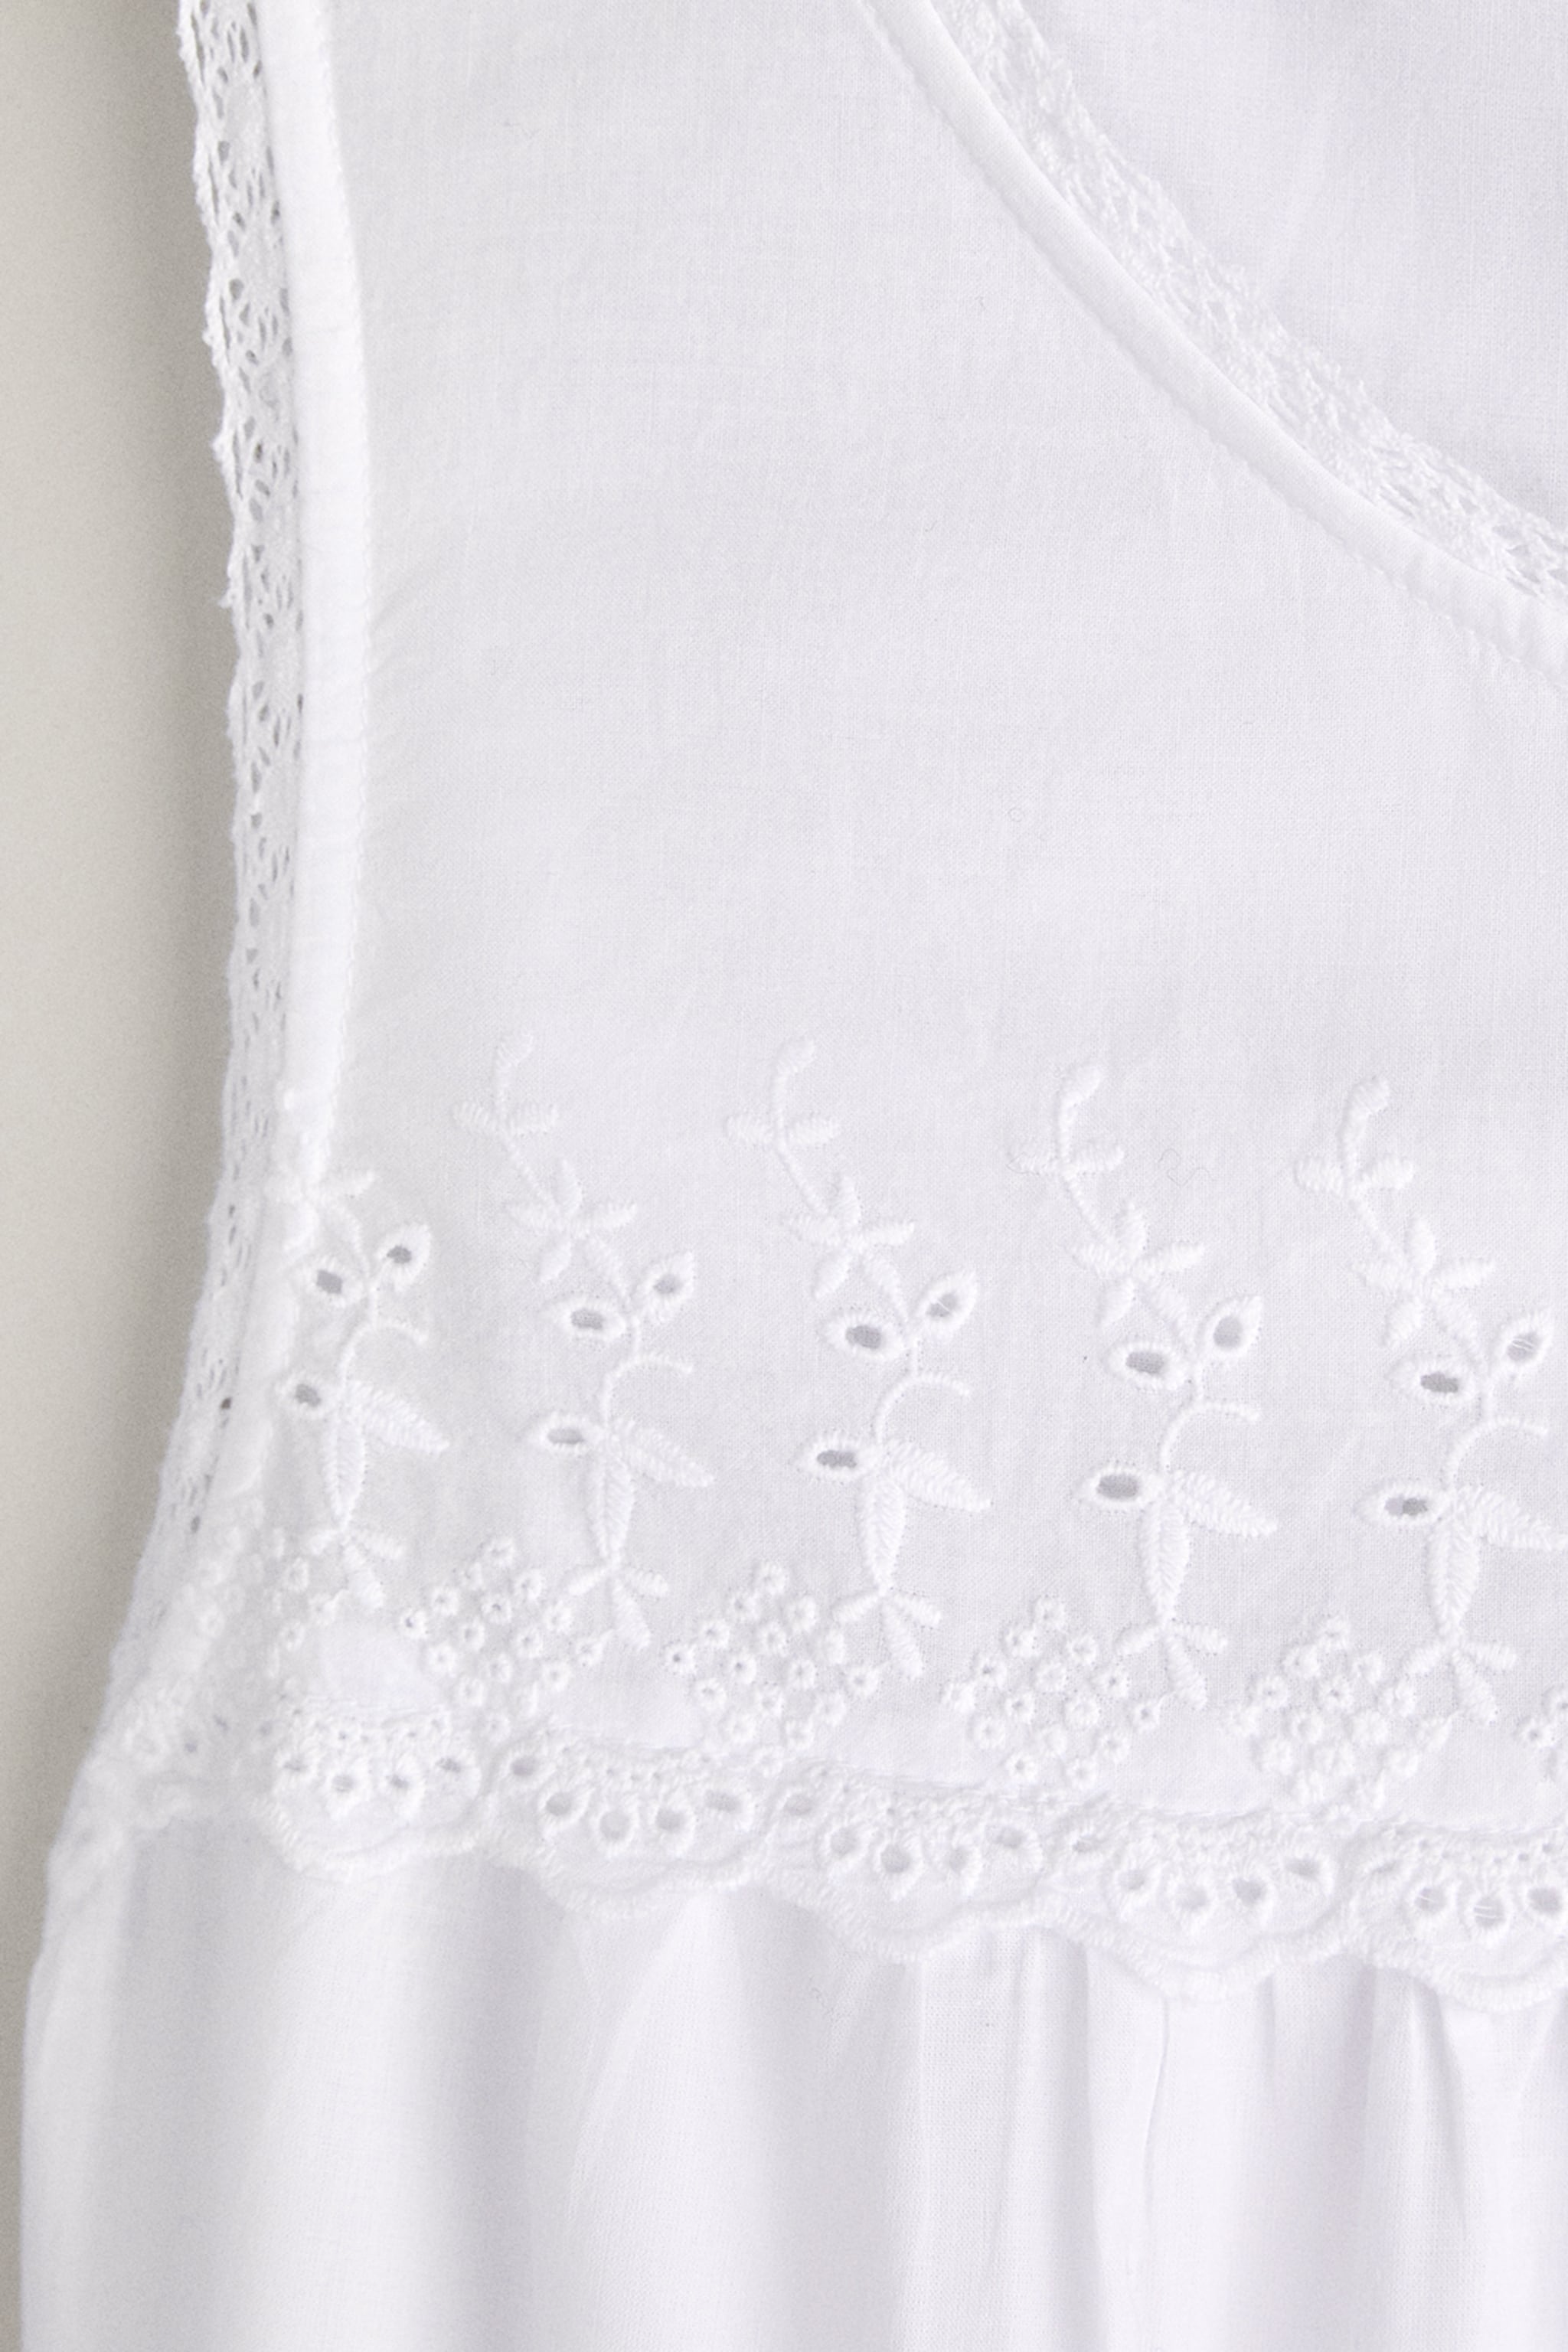 EMBROIDERED COTTON NIGHTGOWN